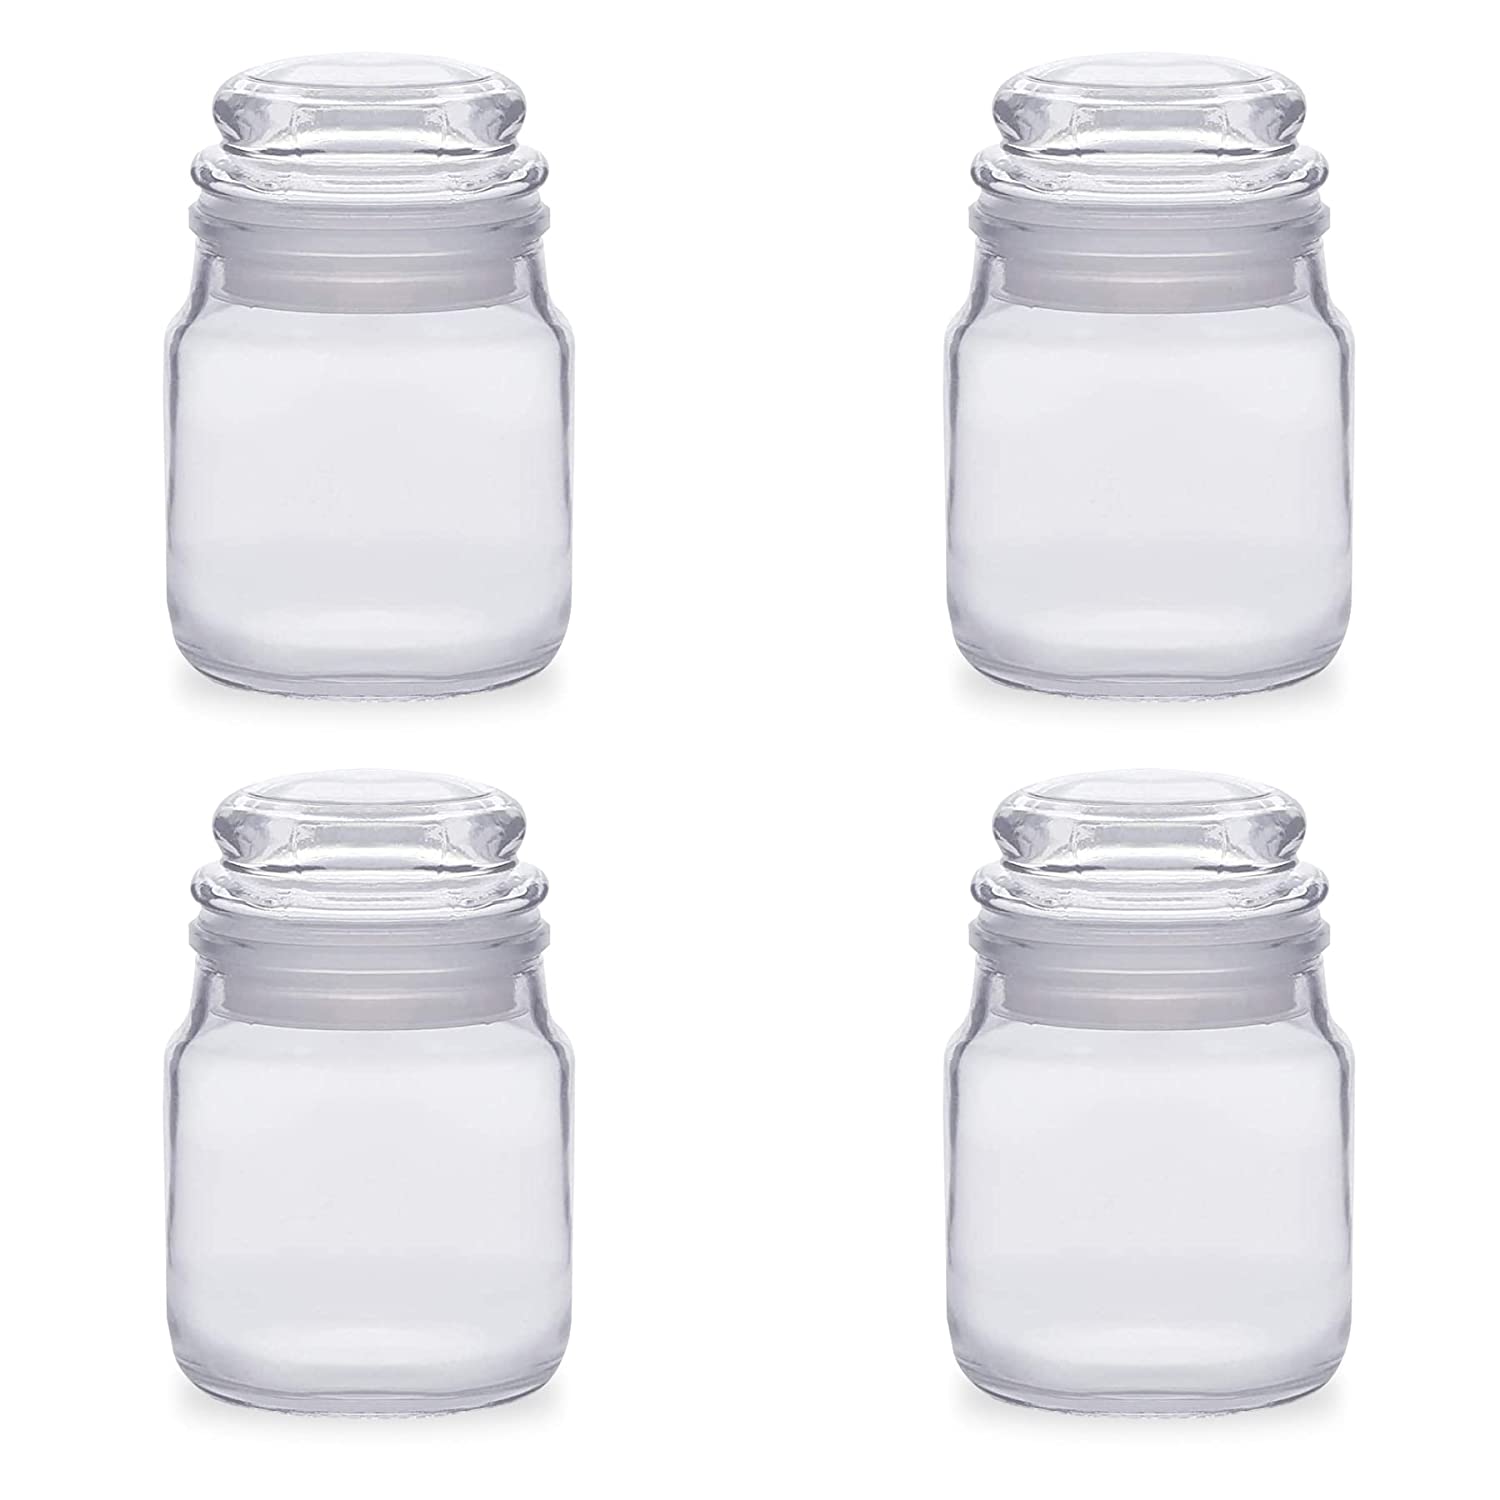 Transparent Glass Storage Jar With Airtight Lid - Perfect For